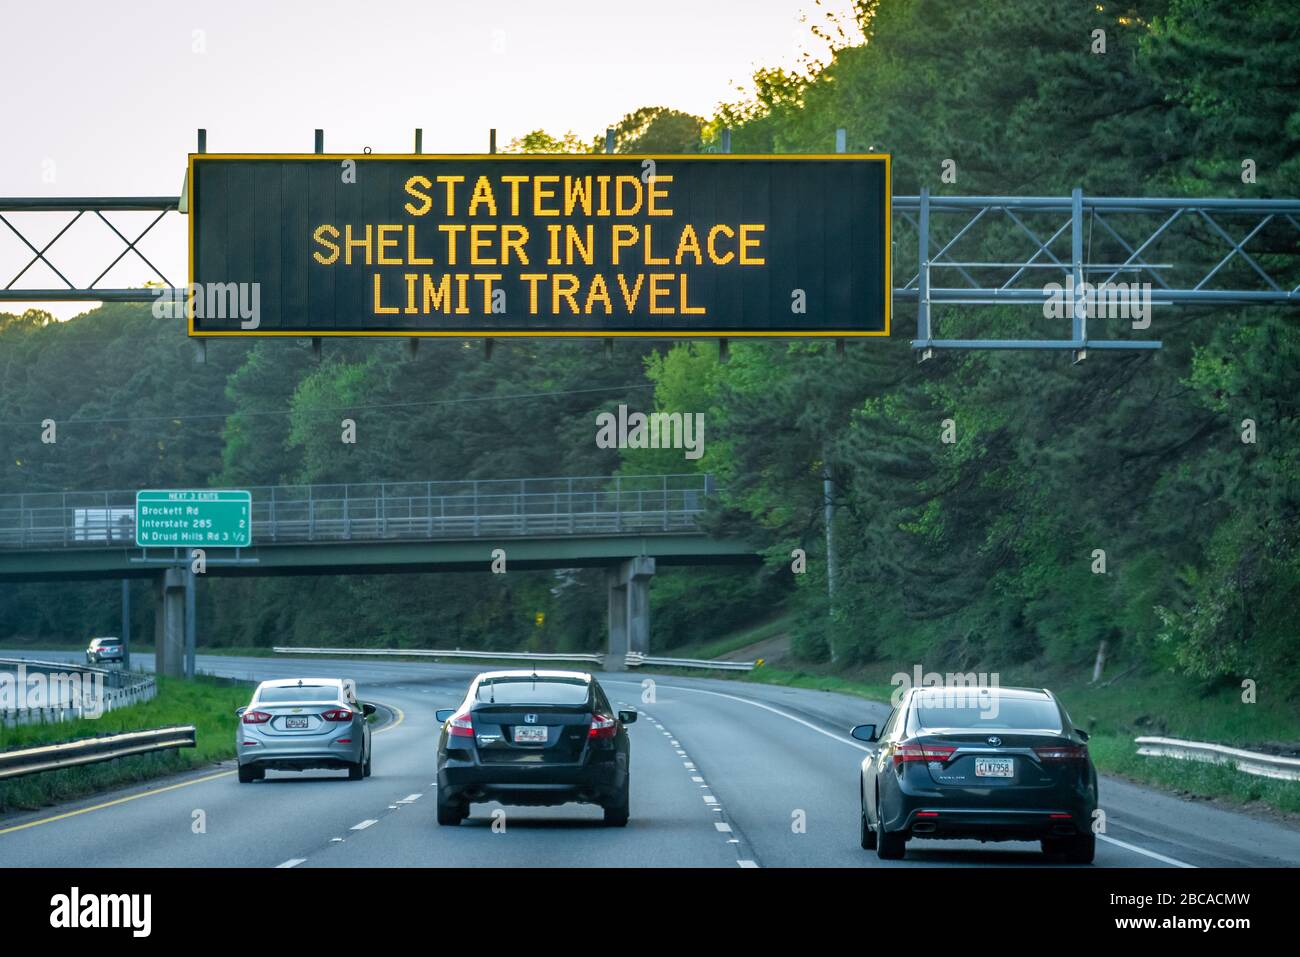 Coronavirus pandemic 'Statewide Shelter in Place' traffic sign over Highway 78 in Atlanta, Georgia during the 2020 COVID-19 outbreak. (USA) Stock Photo